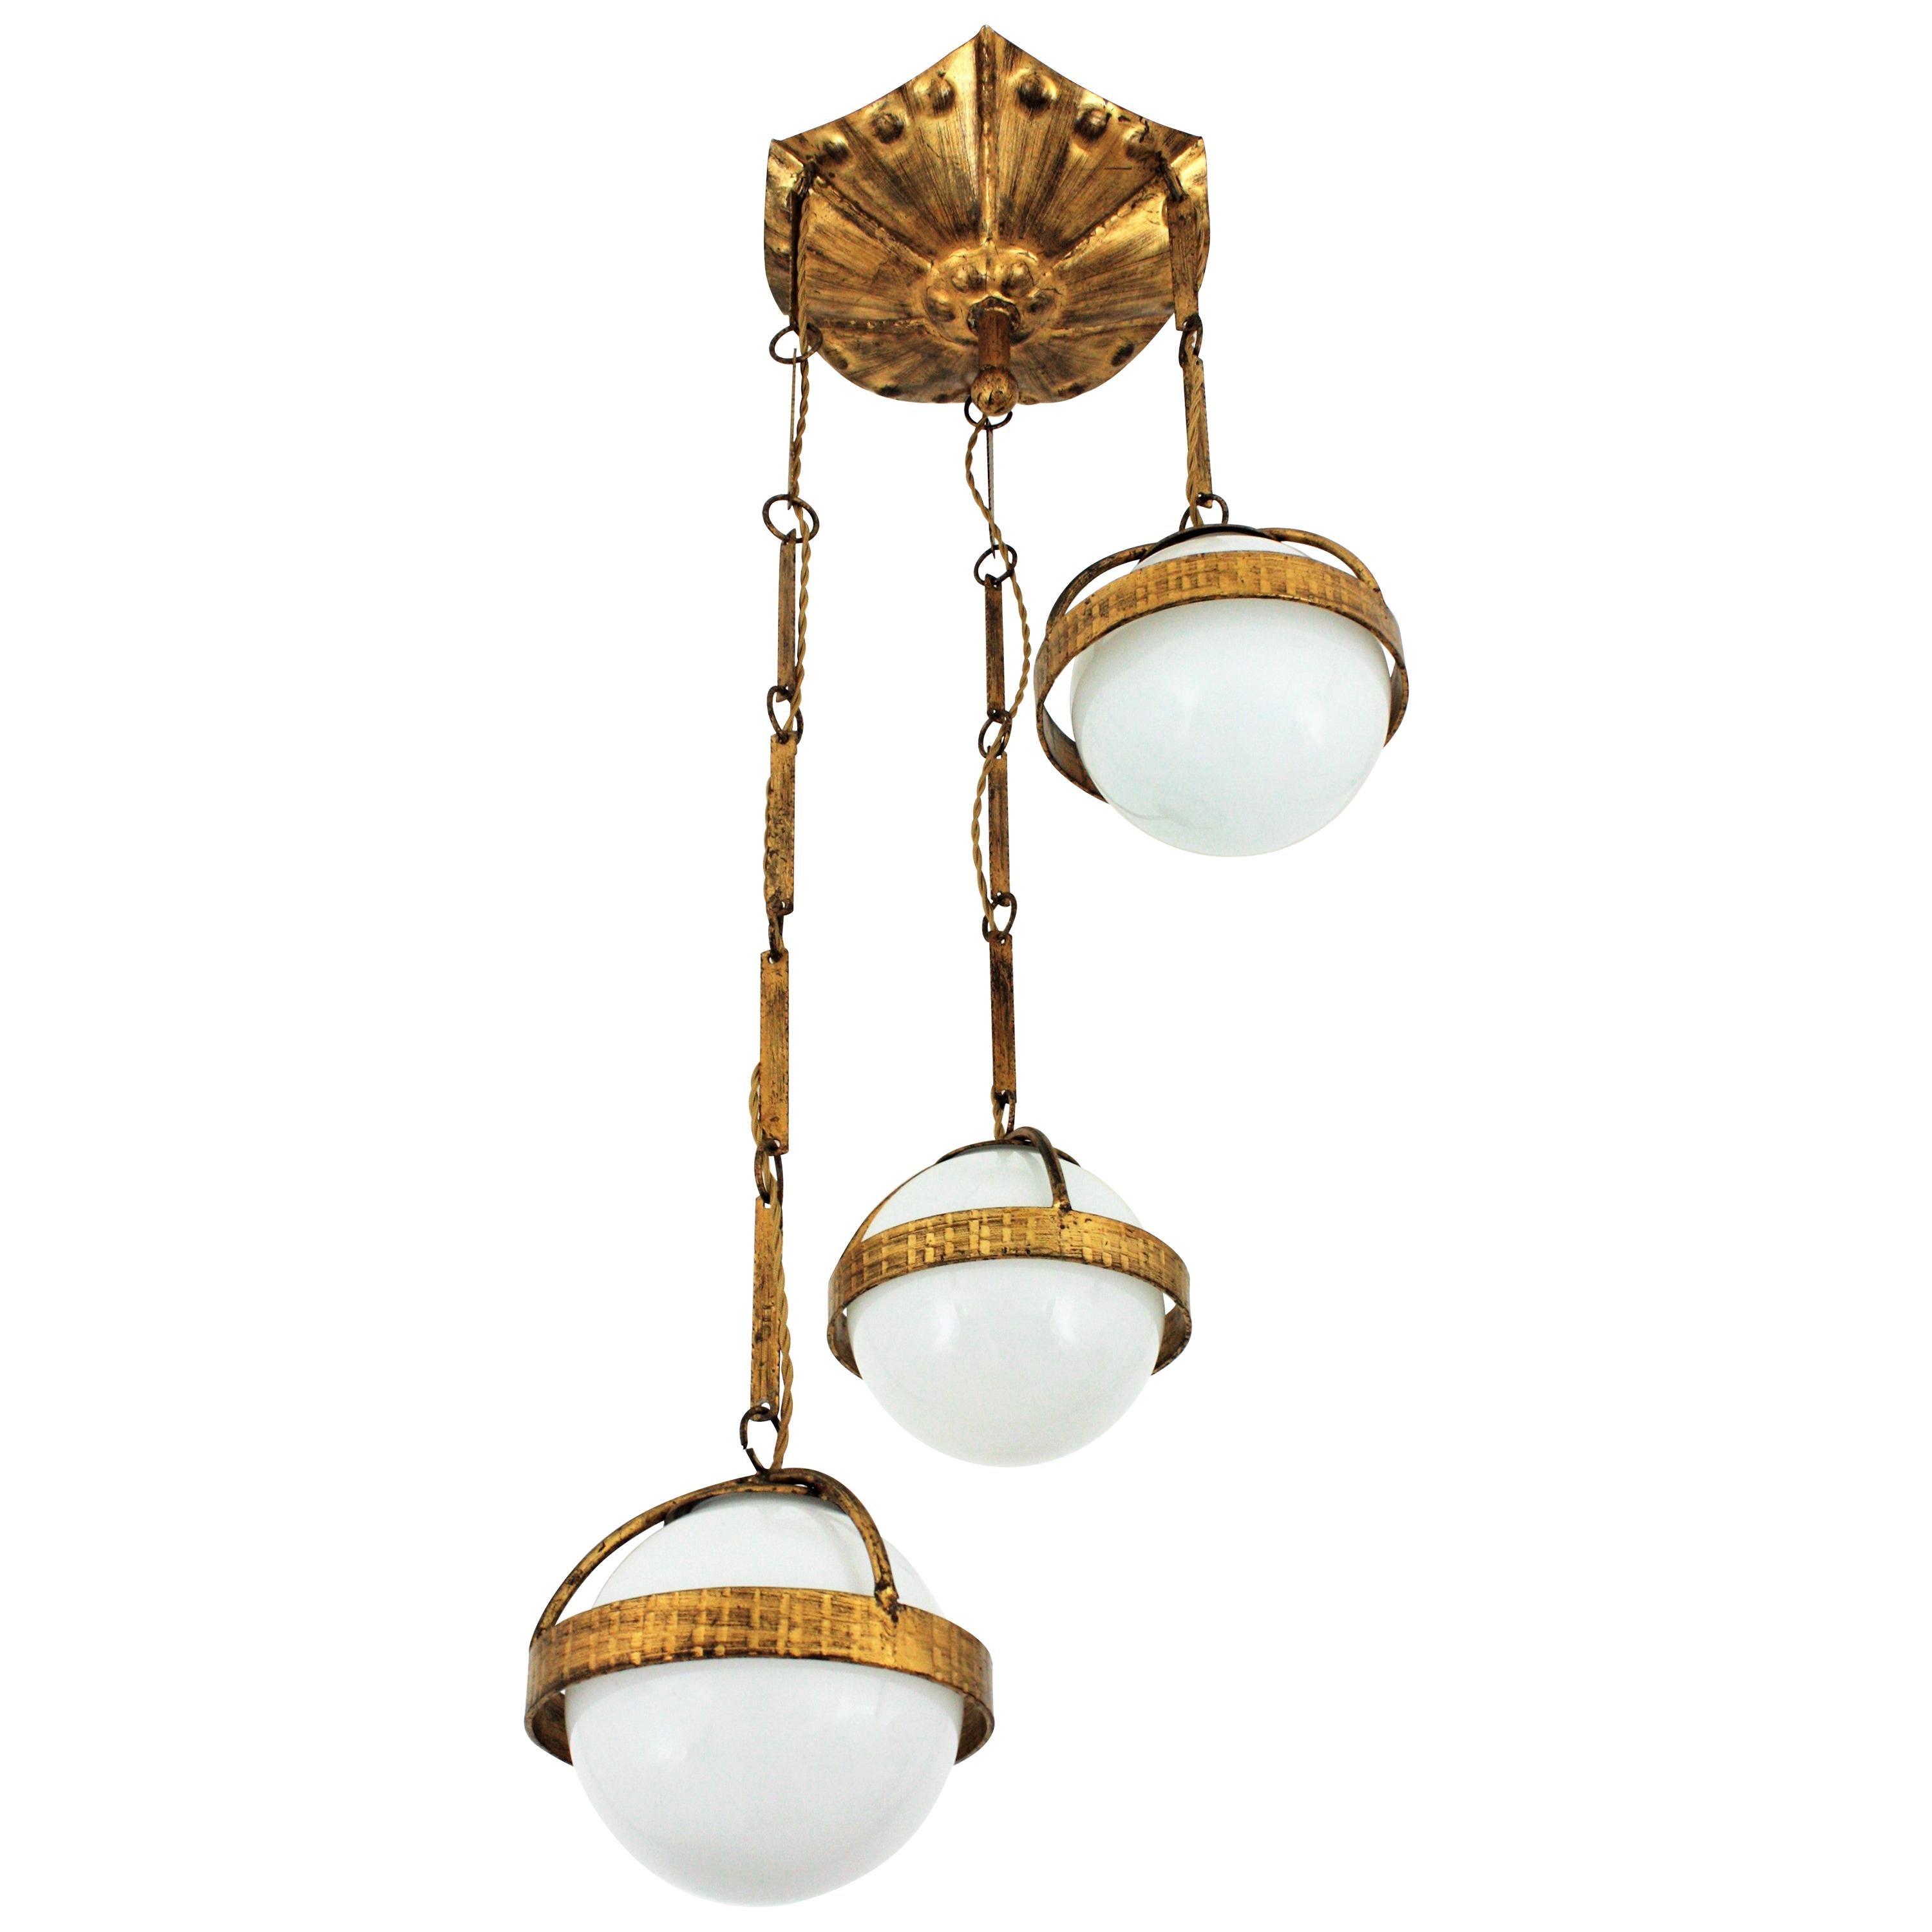 Spanish Cascade Chandelier / Pendant in Gilt Wrought Iron with Glass Globes